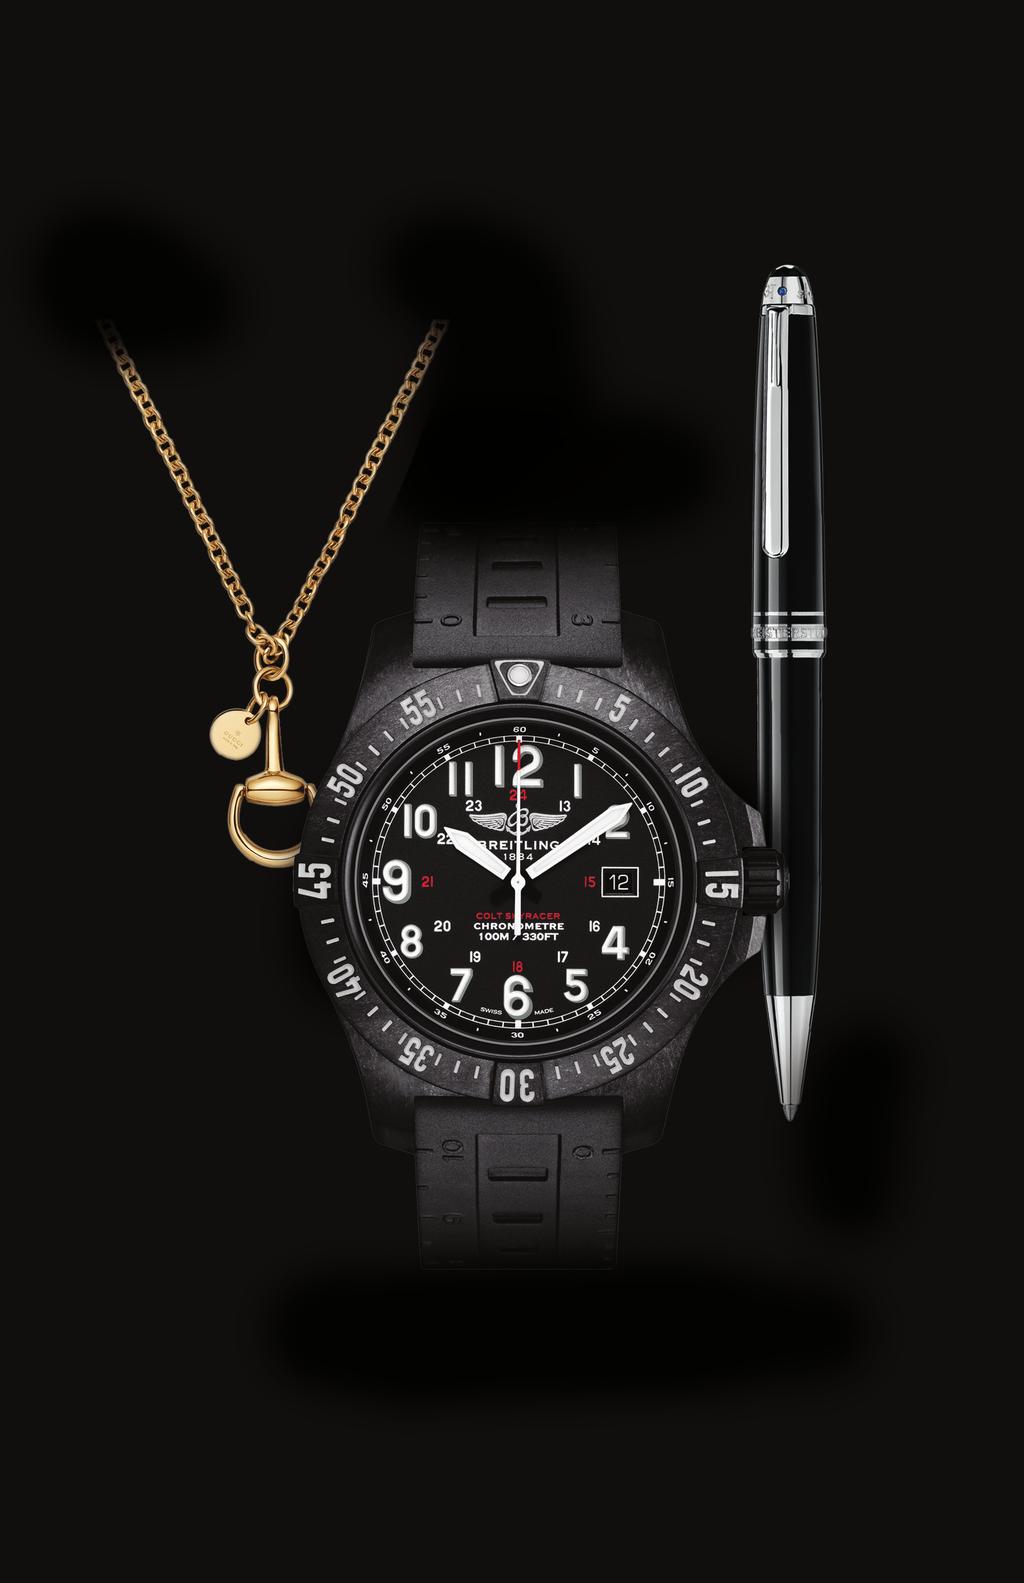 CORPORATE GIFTS AND AWARDS FINE WATCHES, JEWELRY AND ACCESSORIES FROM WORLD RENOWNED BRANDS For